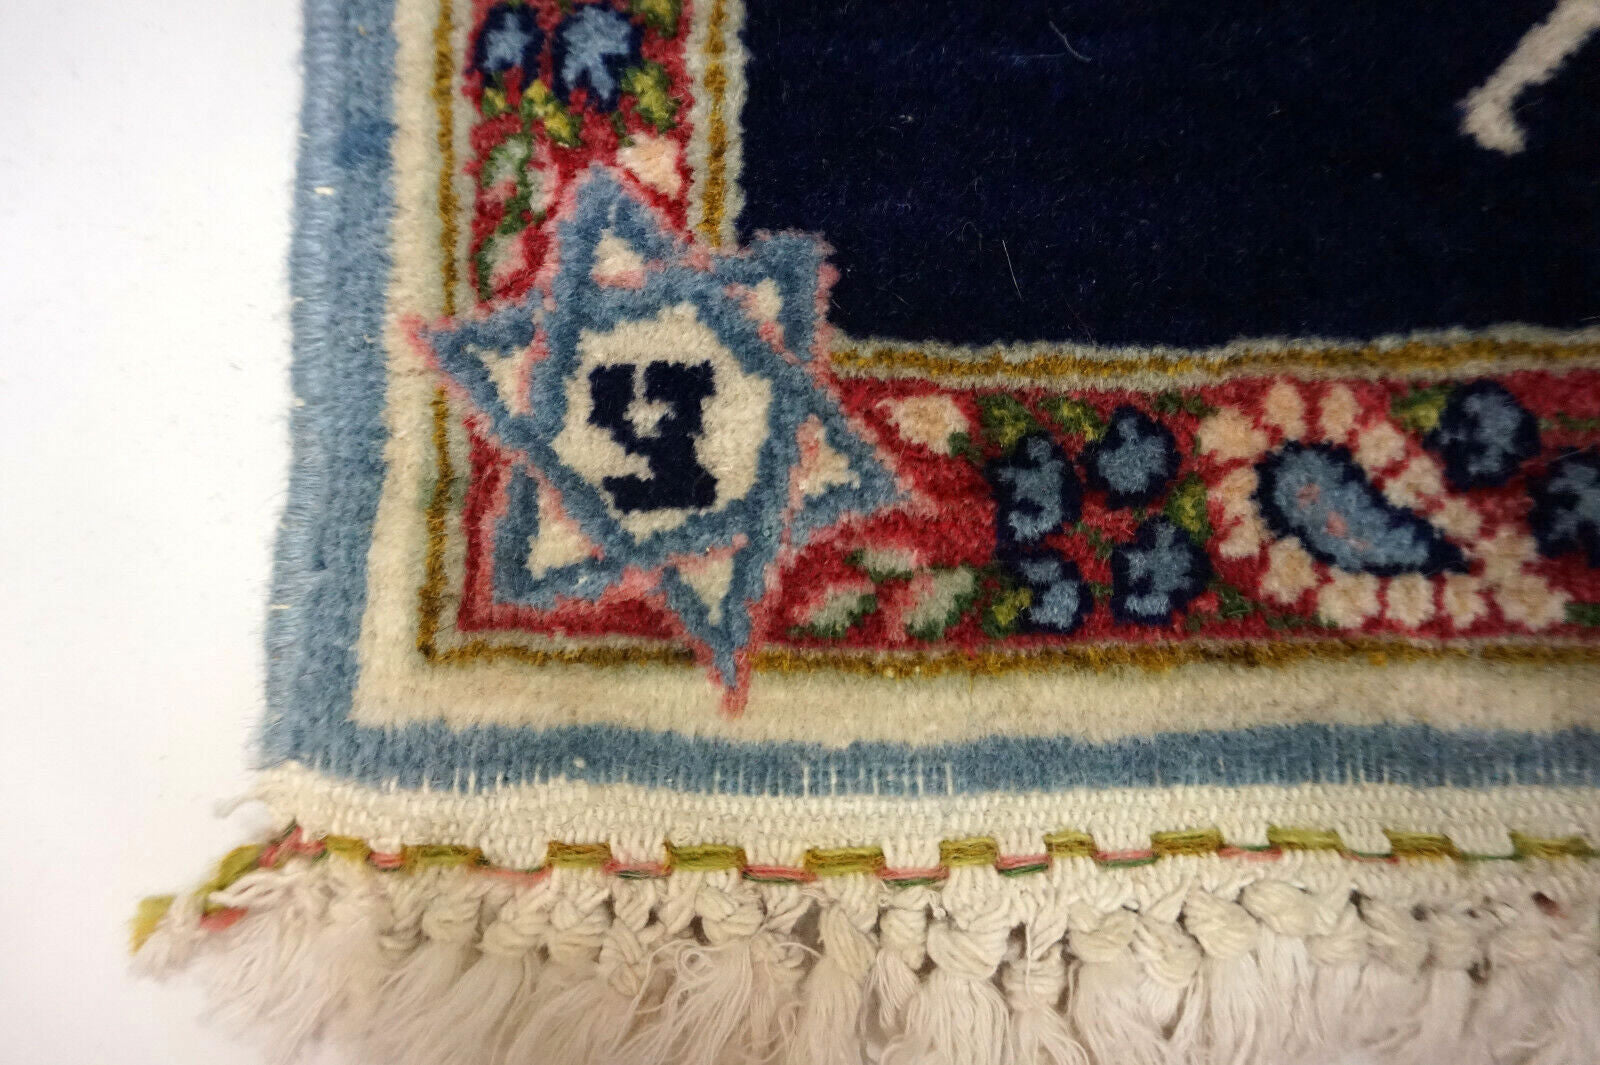 Detailed View of Rug's Edges and Fringes